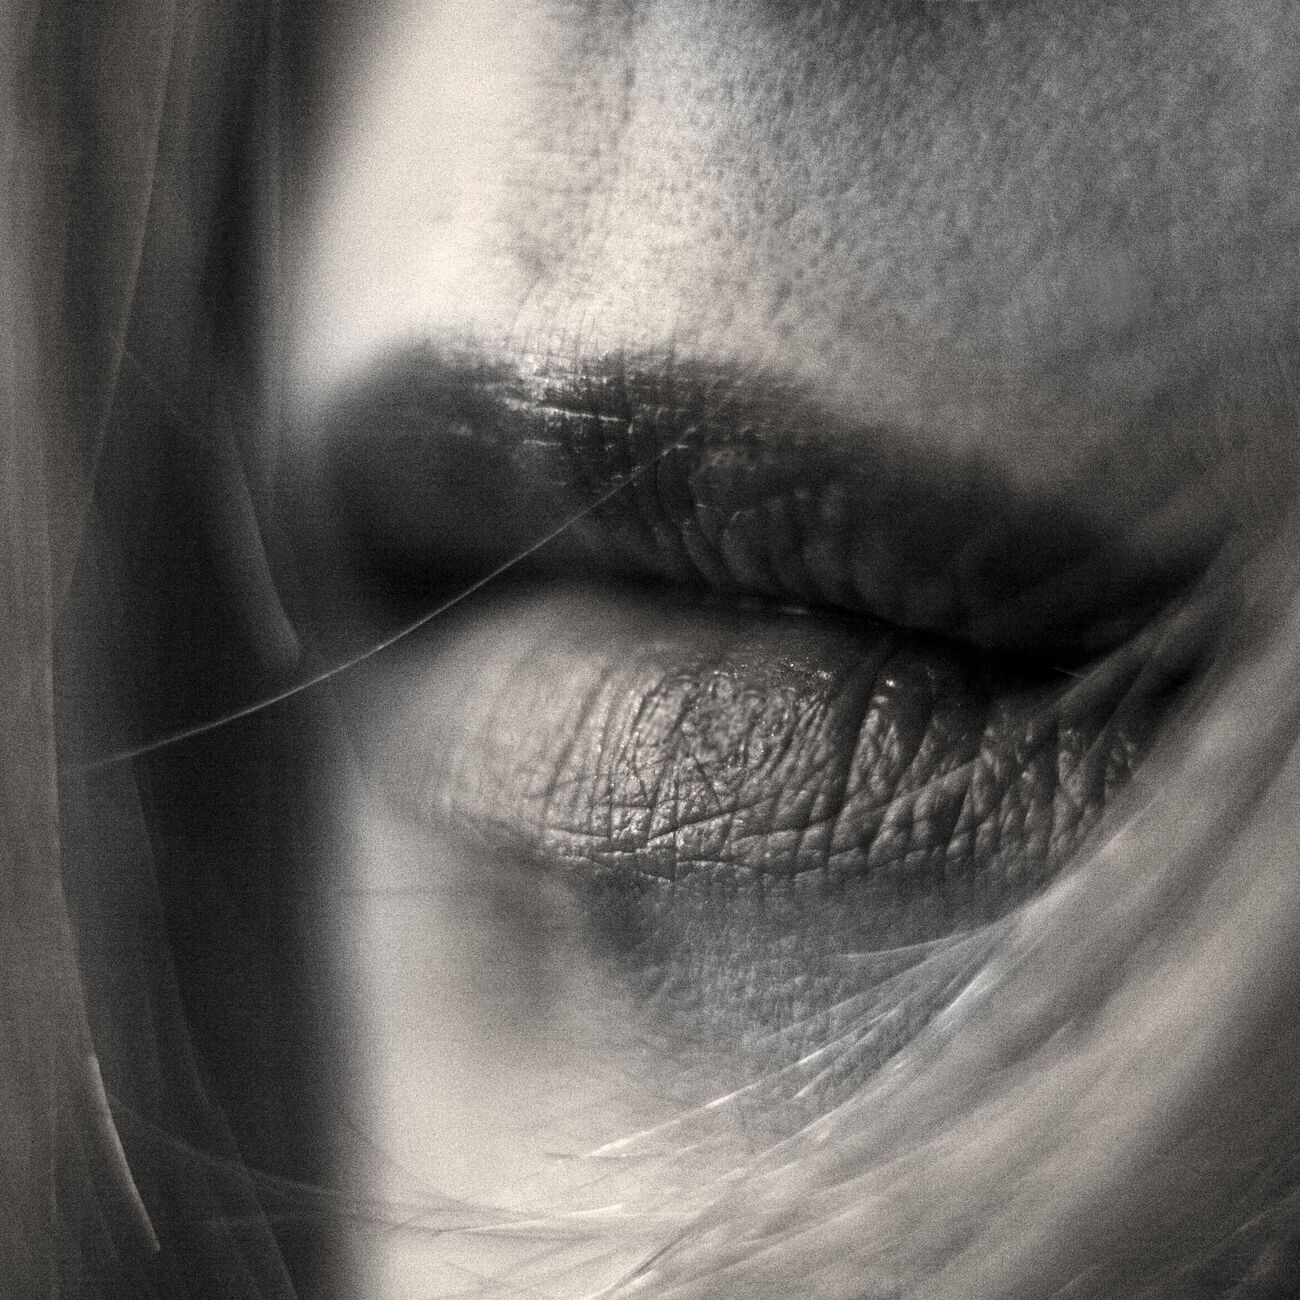 Achat d'une photographie 23 x 23 cm, Sweet on her lips. Ref-580-1 - Denis Olivier Photographie d'Art